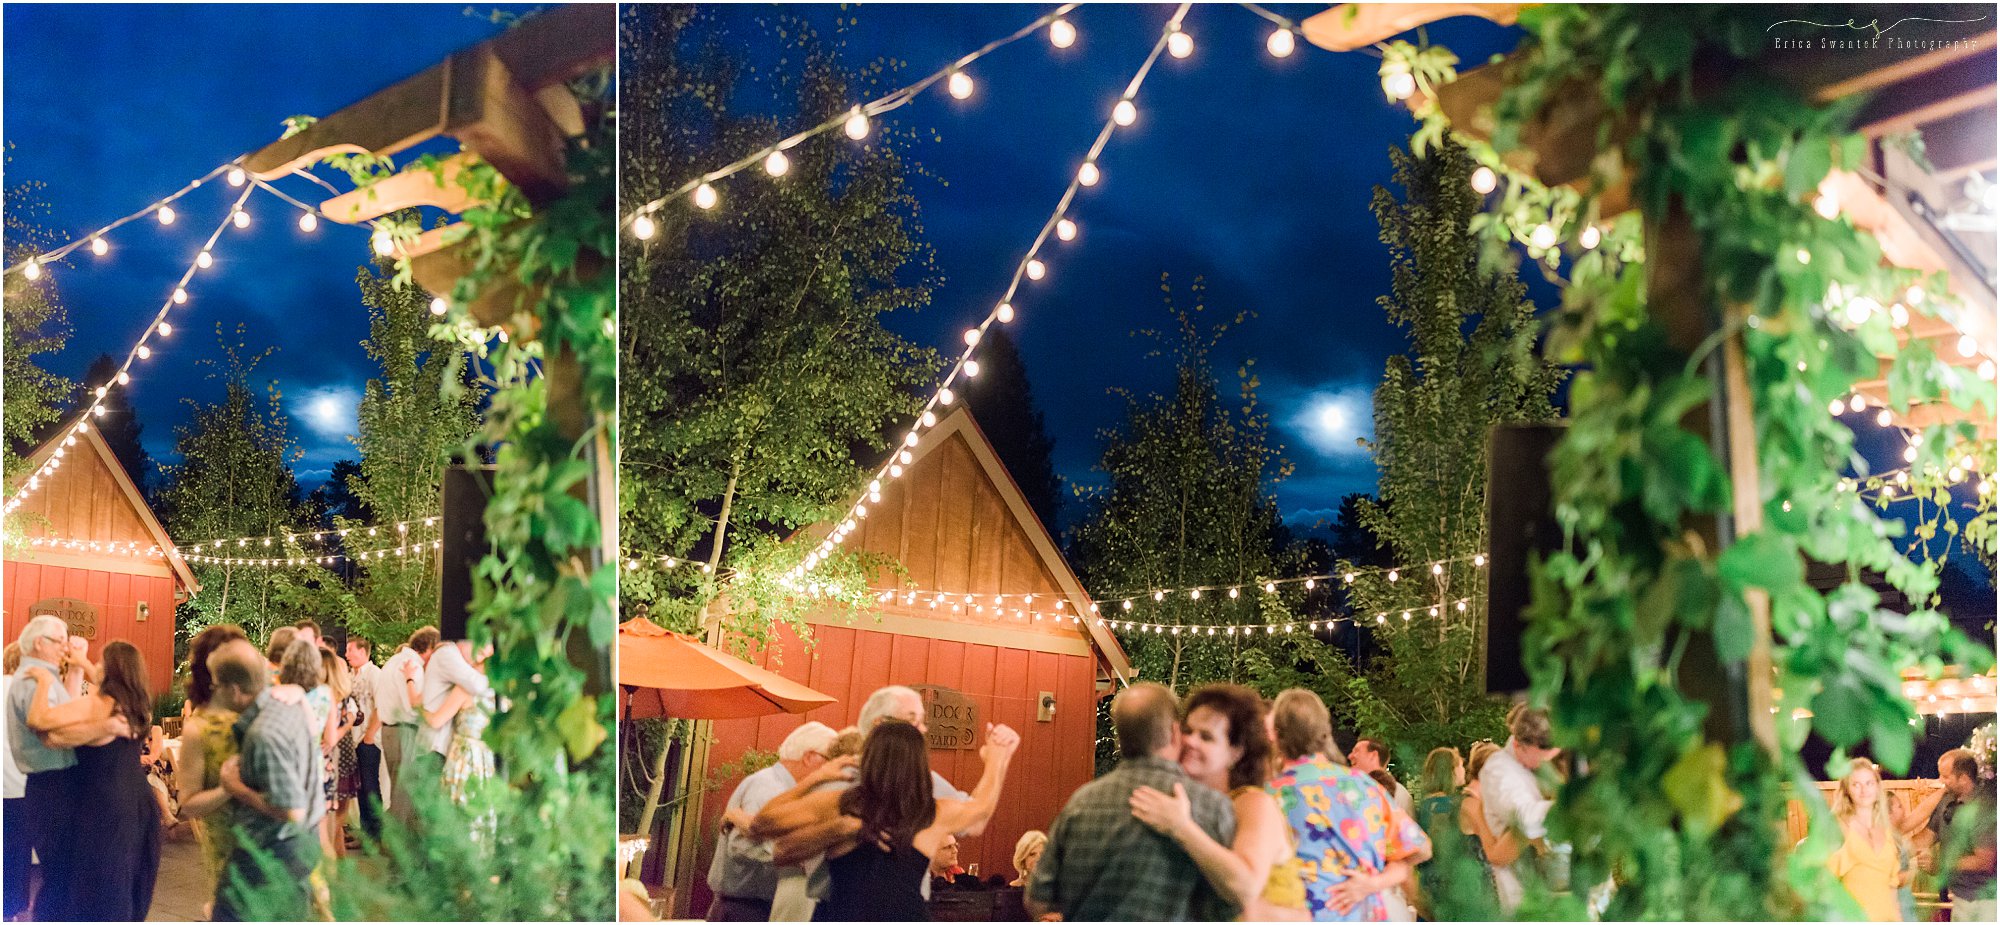 A gorgeous summer evening for an outdoor garden art gallery wine bar wedding at the Open Door in Sisters, OR. | Erica Swantek Photography